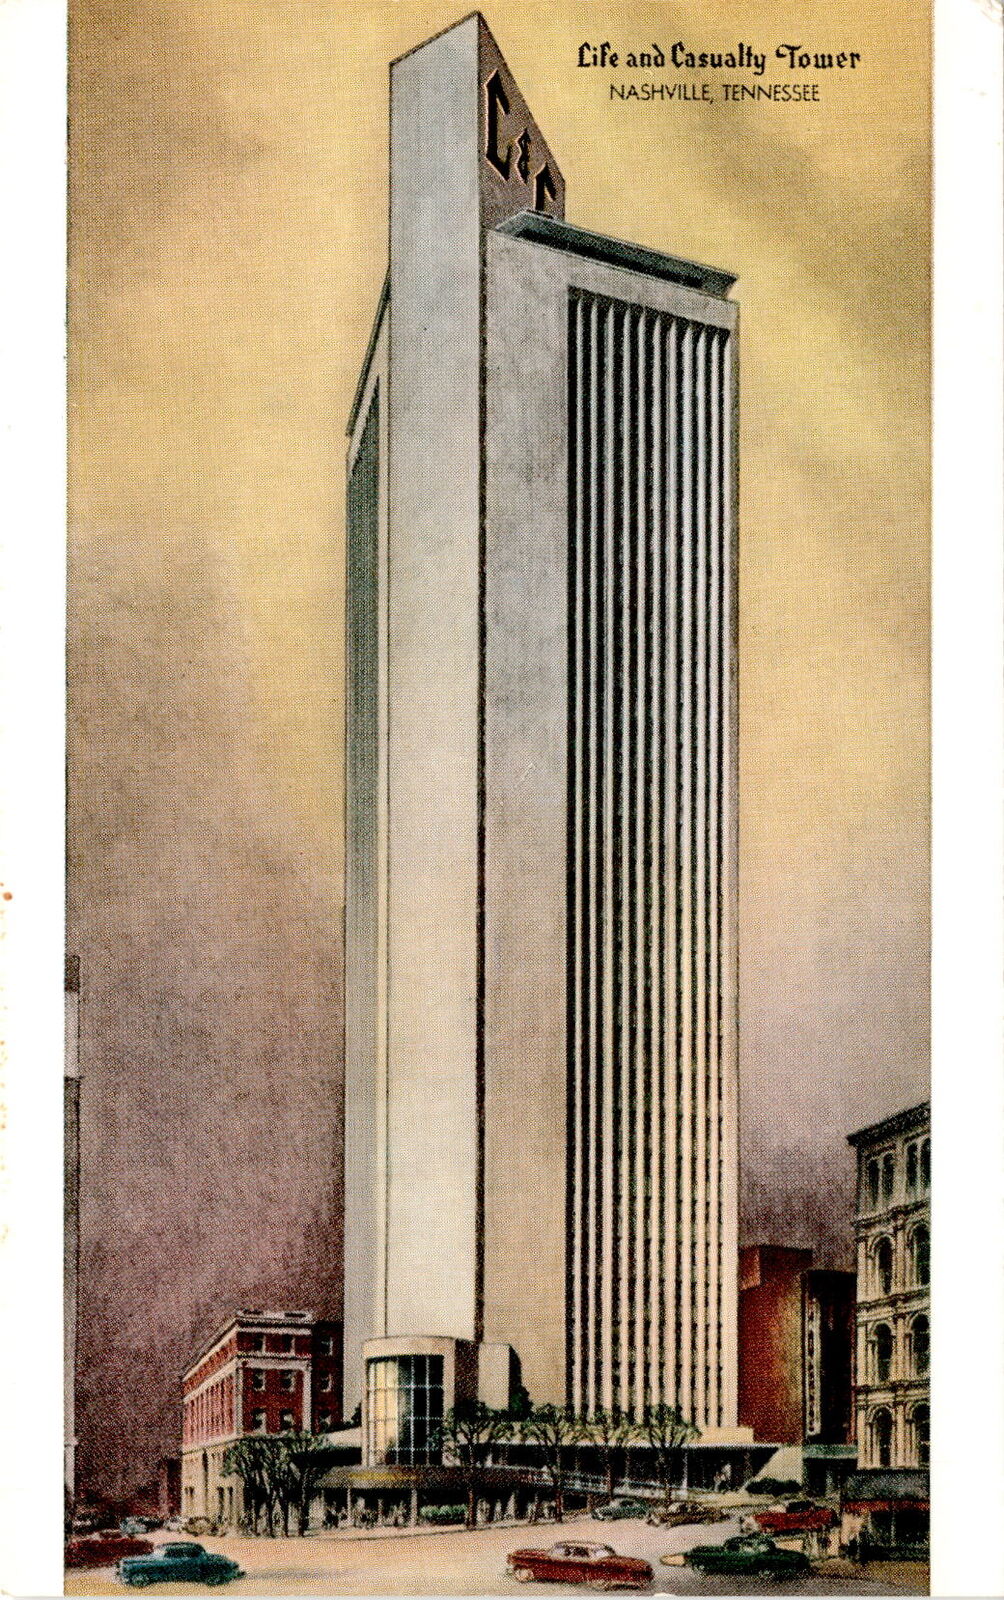 Life and Casualty Tower, Nashville, Tennessee, Life and Casualty Postcard